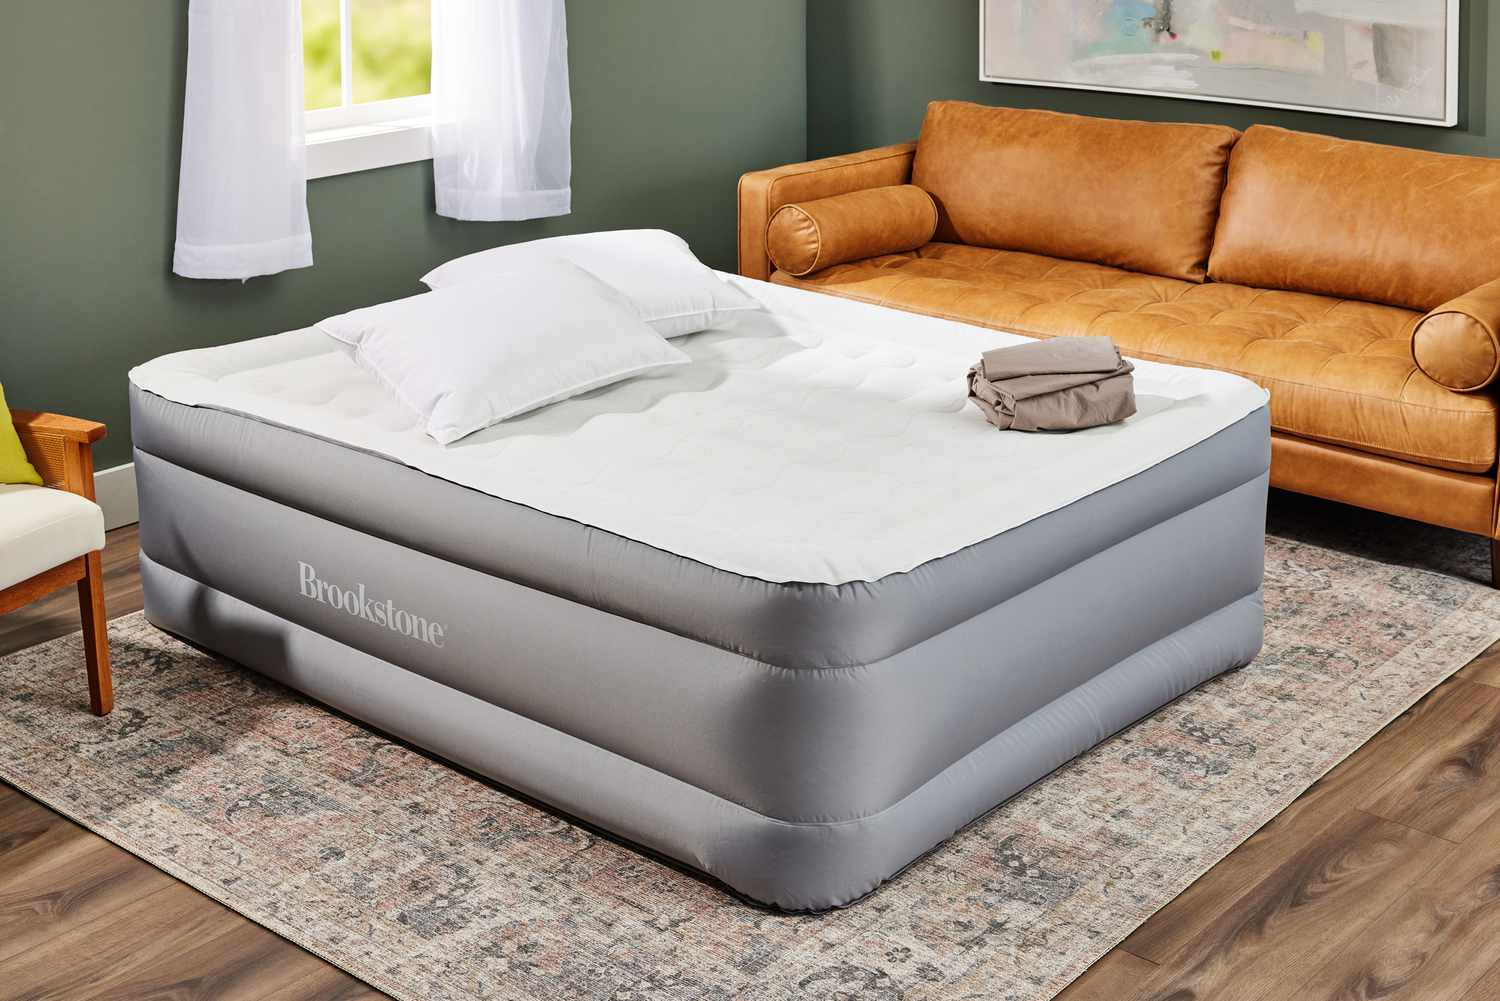 The Brookstone Perfect Queen Air Mattress with Built-in Pump after being inflated